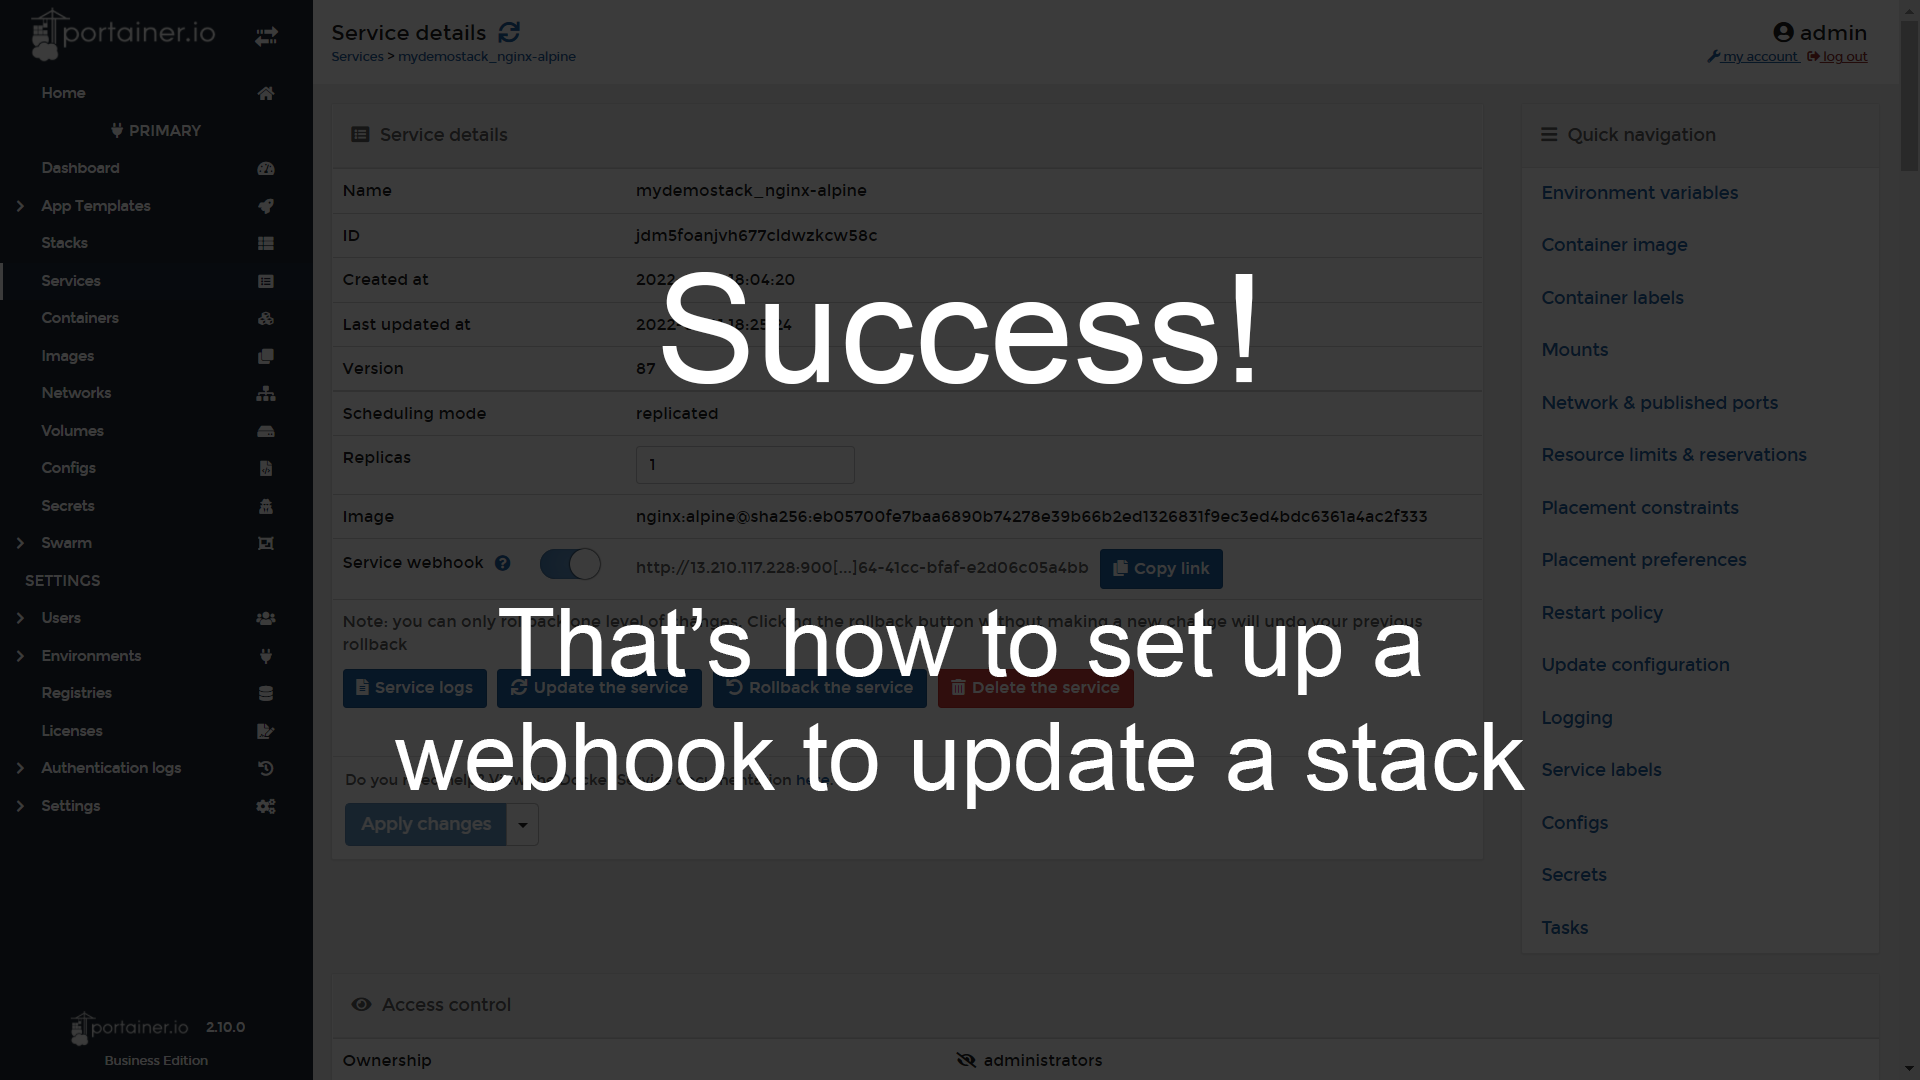 How to set up a webhook to update a stack - slide 5